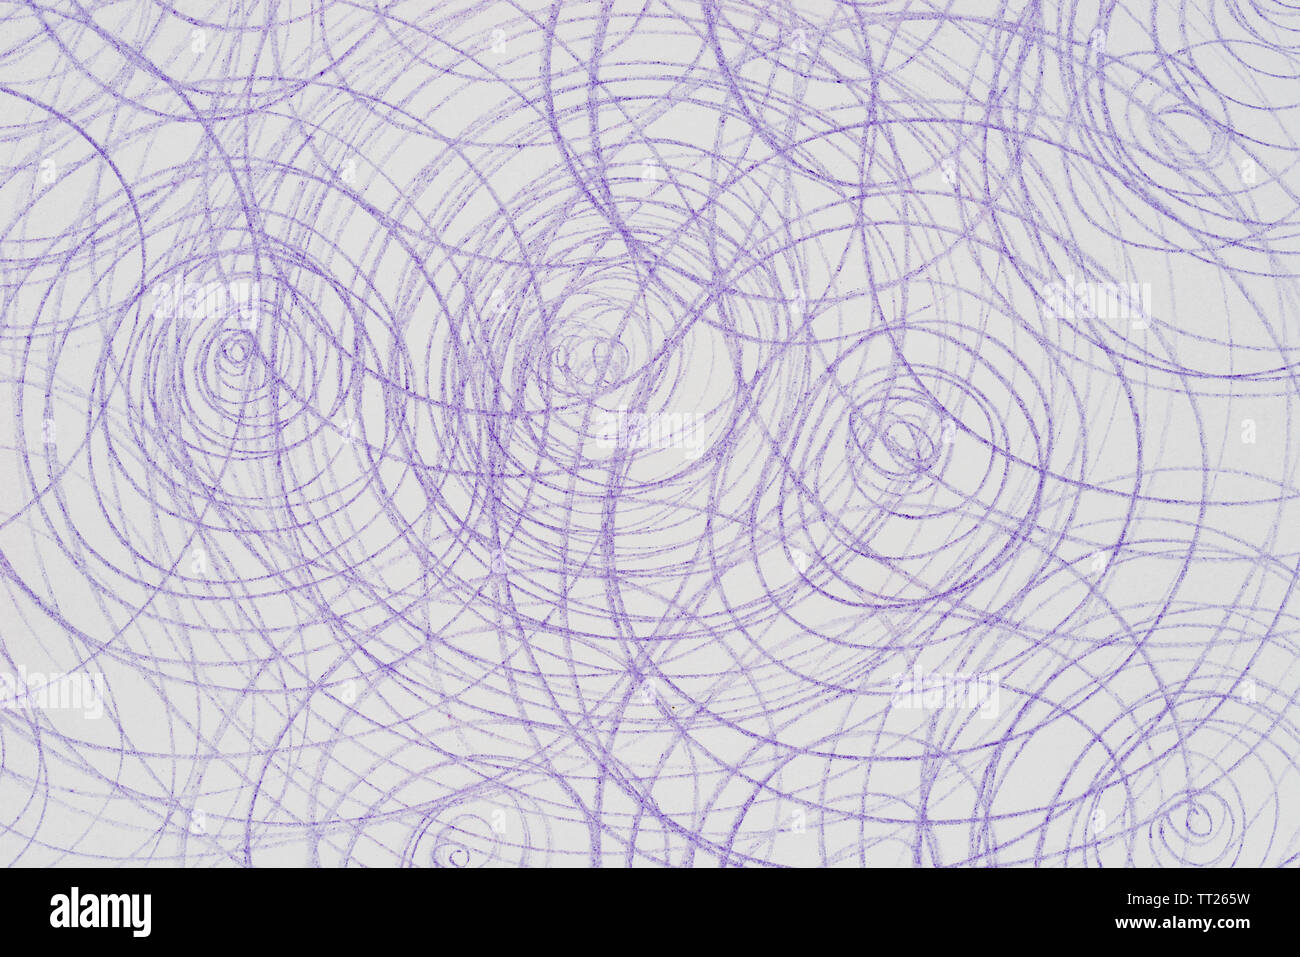 violet crayon doodles on white paper background Stock Photo